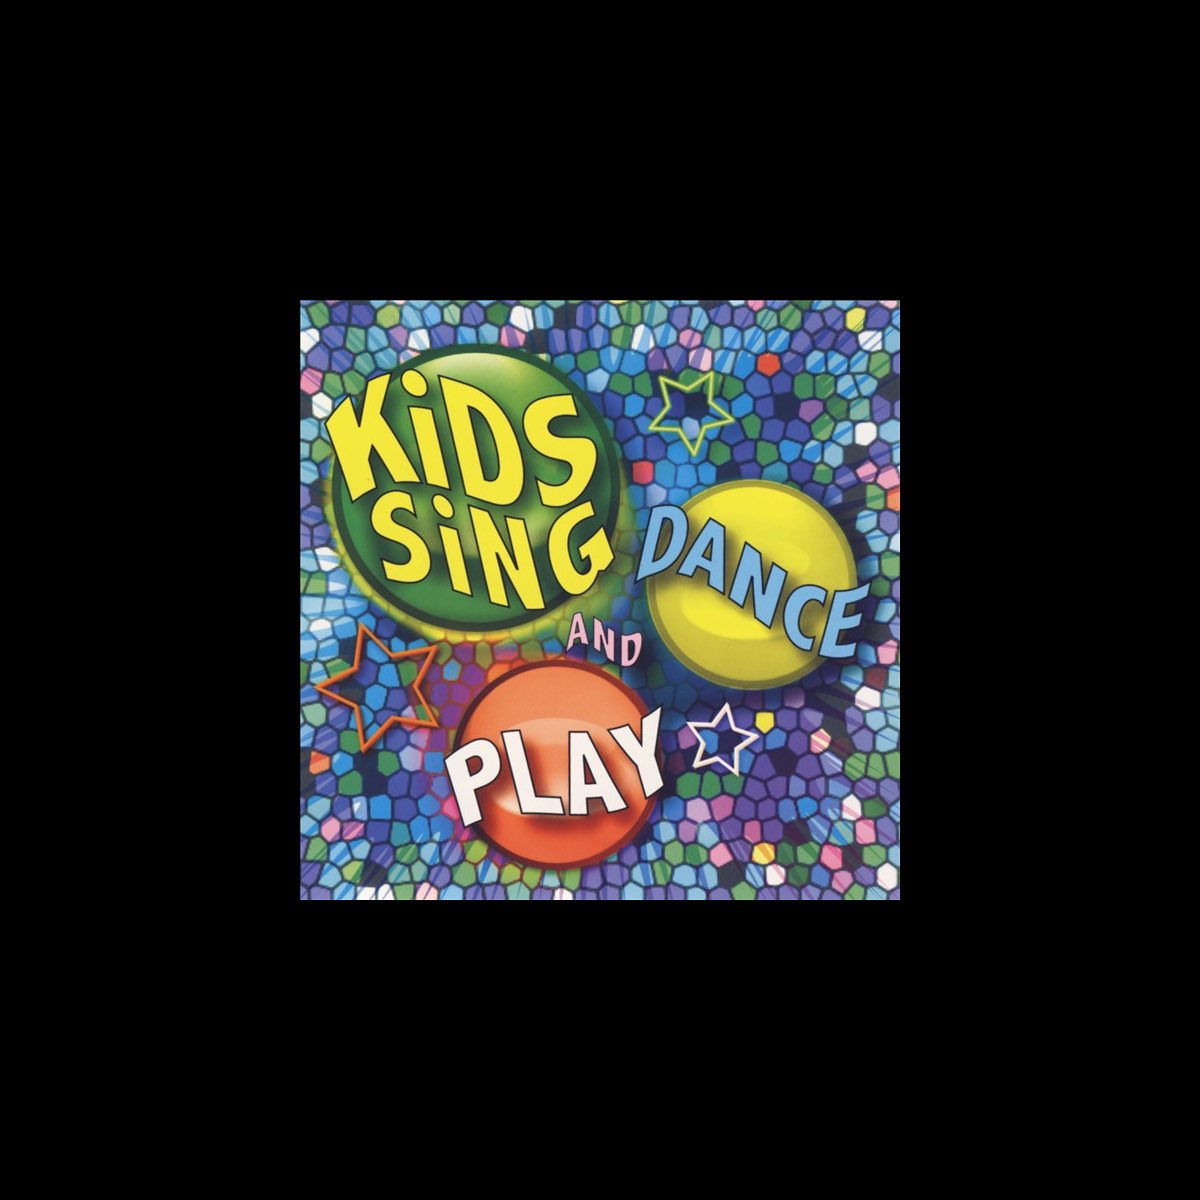 Kids Sing Dance and Play - Album by Kids Sing Dance And Play 